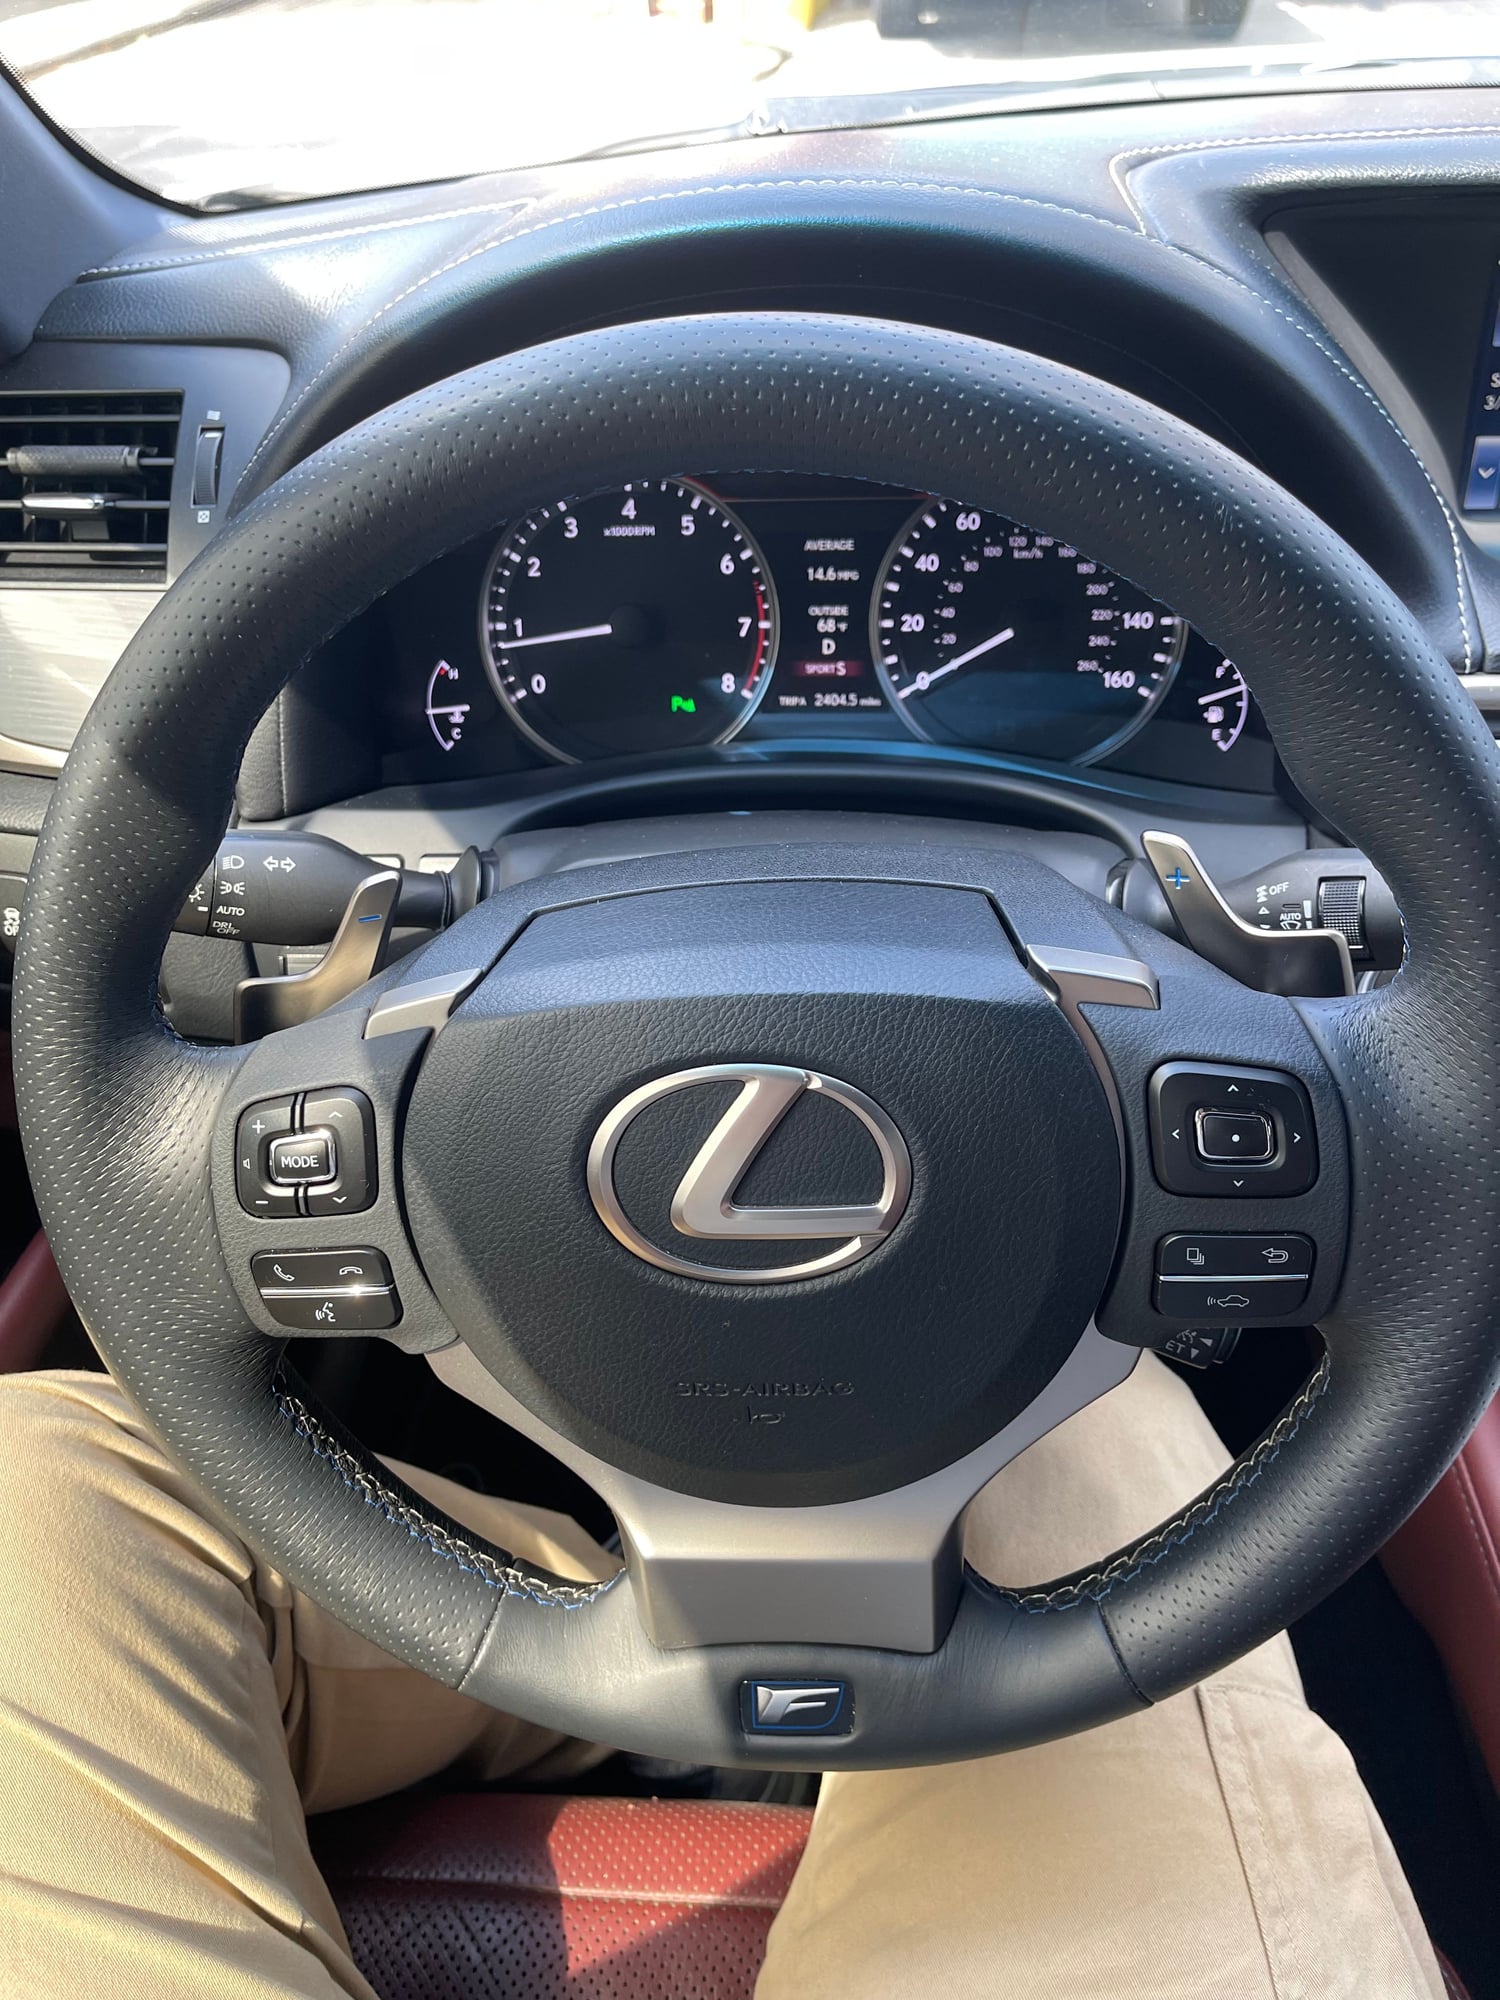 Interior/Upholstery - **Like New**GS F/RC F Steering Wheel - Used - 2016 to 2021 Lexus GS F - 2015 to 2021 Lexus RC F - 2014 to 2021 Lexus IS350 - 2014 to 2021 Lexus RC350 - 2014 to 2021 Lexus GS350 - Atlanta, GA 30004, United States